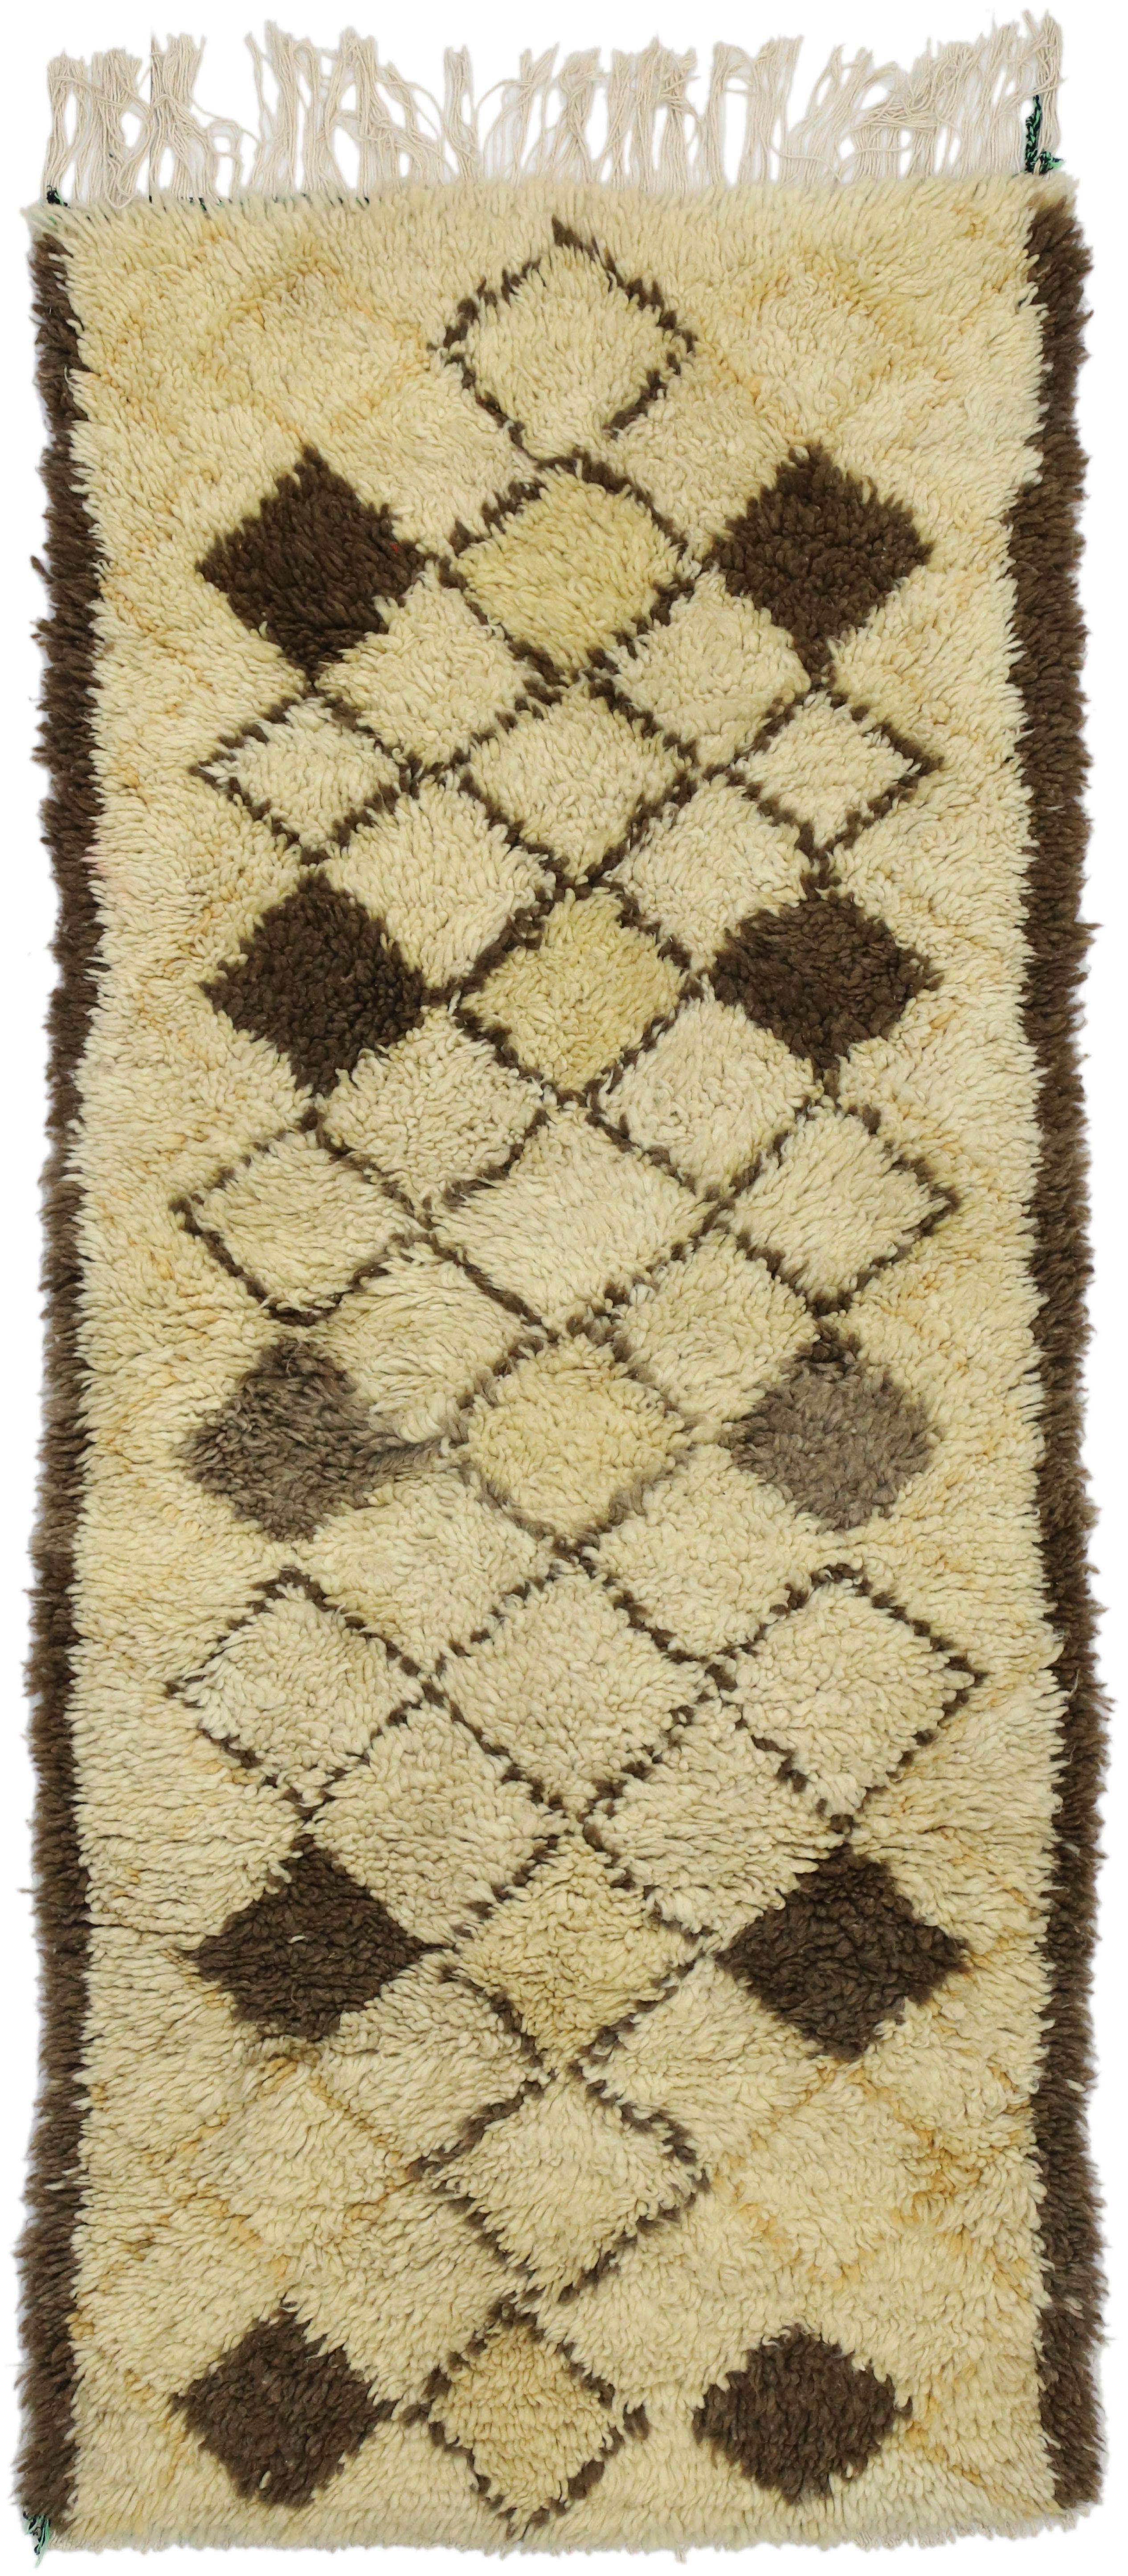 Vintage Moroccan Azilal Rug, Neutral Berber Moroccan Rug with Neutral Colors